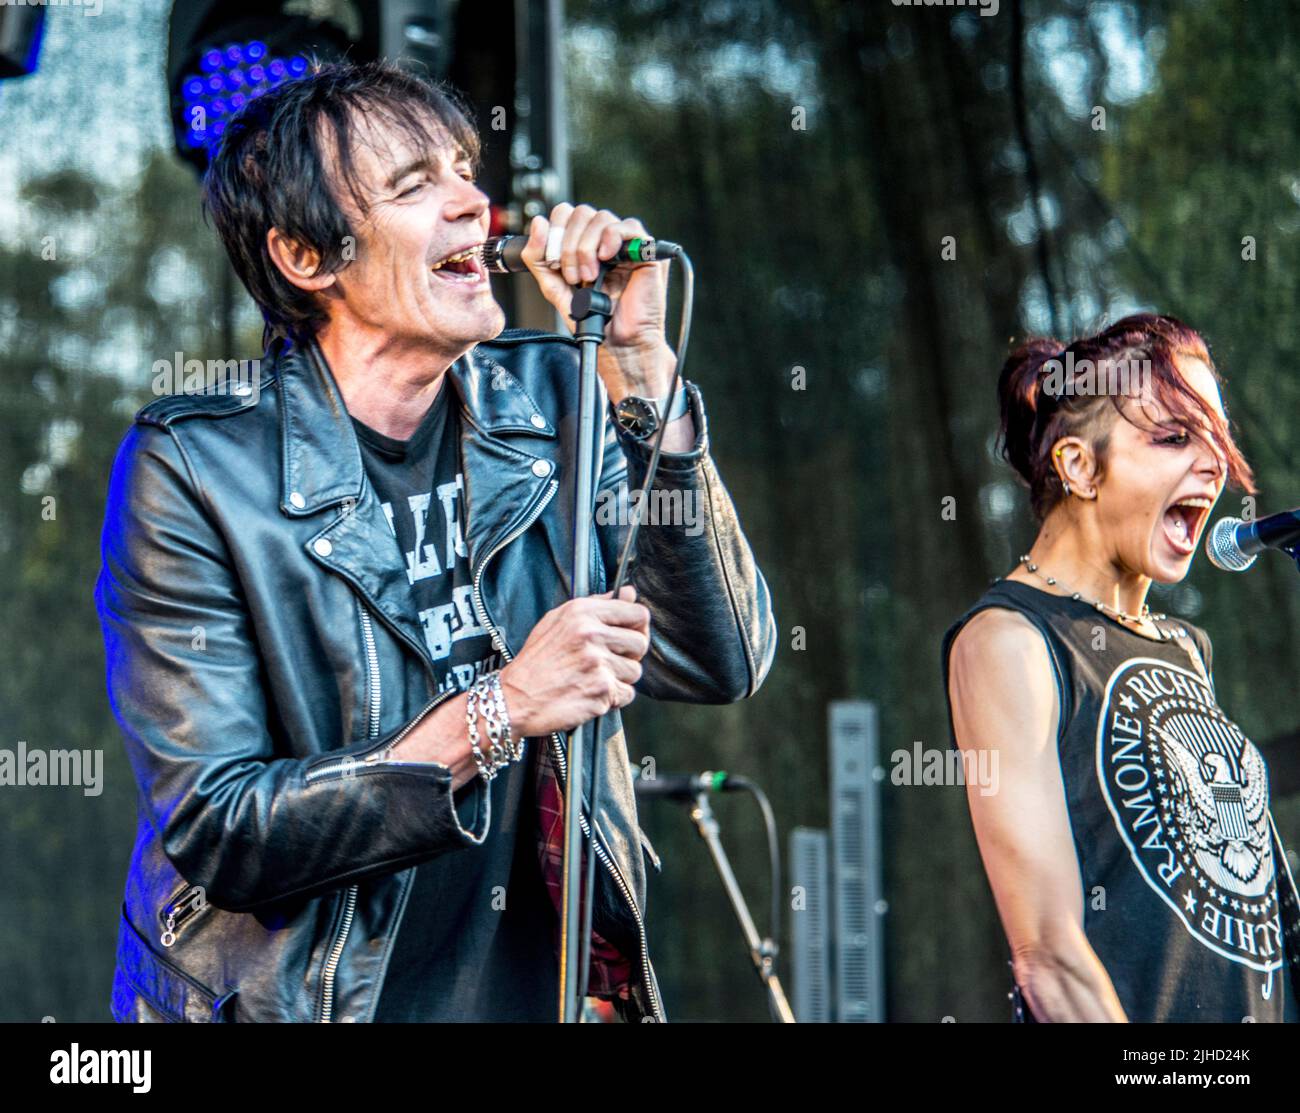 Richie Ramone and his band perform new and old songs. Richie was the drummer in the iconic punkrock band the Ramones. Here he is the lead singer in hi Stock Photo